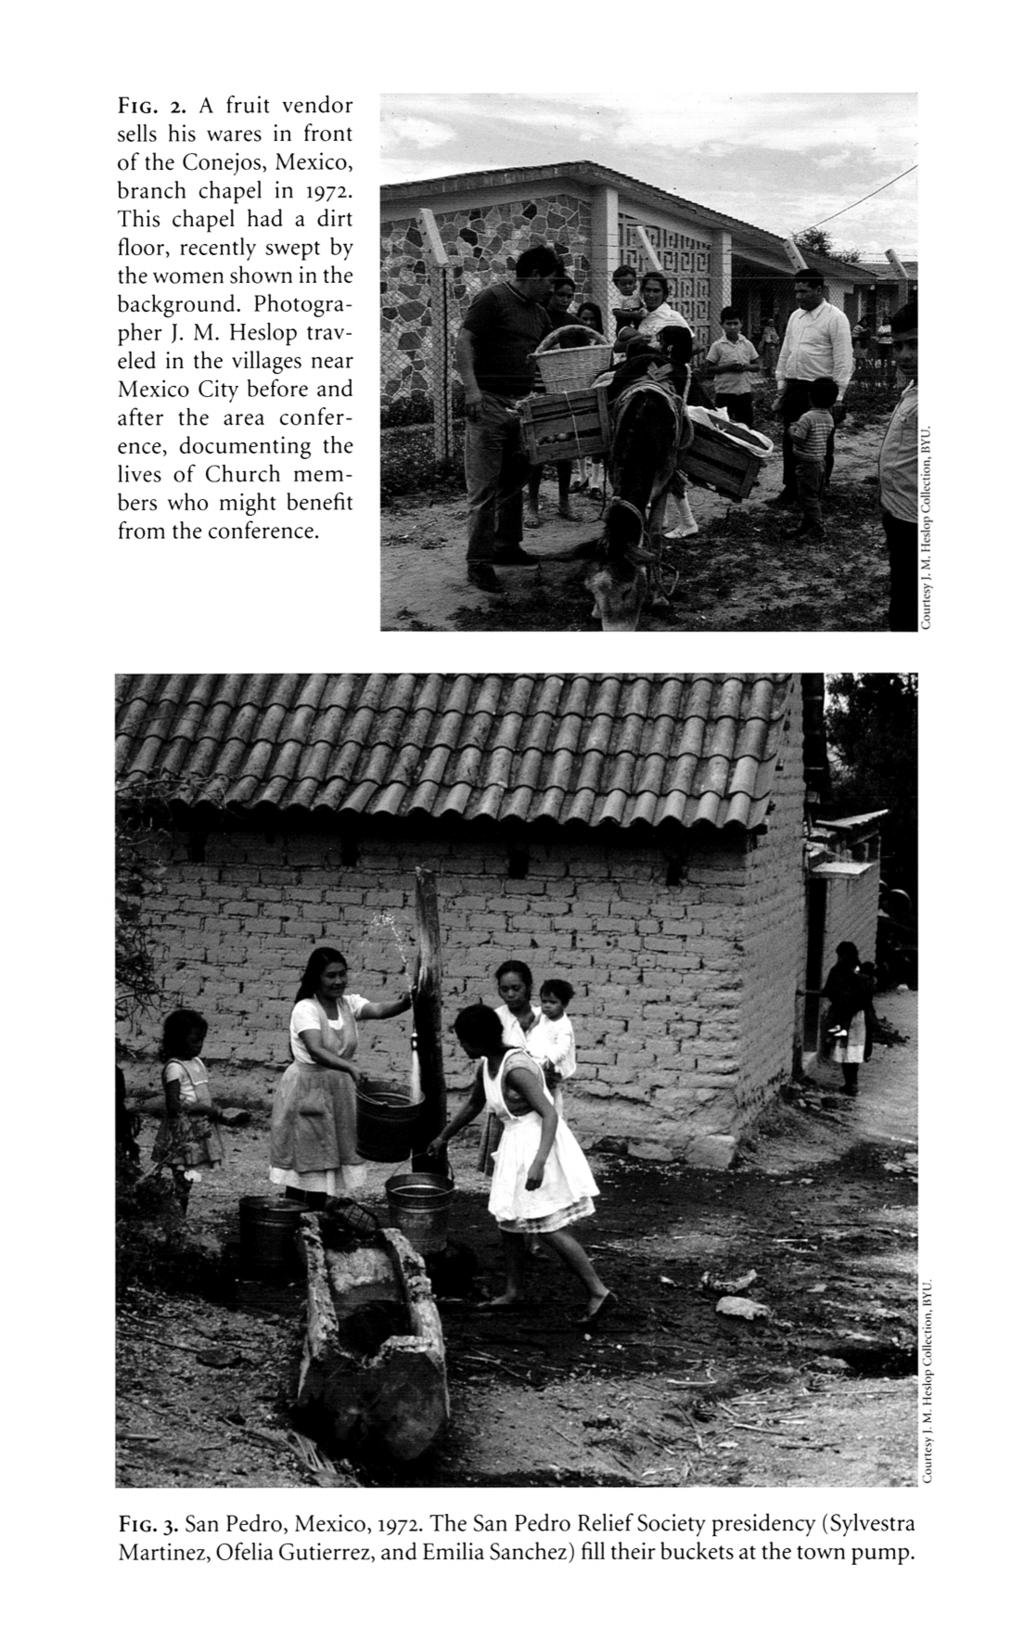 Holzapfel and Lambert: Photographs of the First Mexico and Central America Area Conferen FIG 2 A fruit vendor sells his wares in front of the conejos mexico branch chapel in 1972 this chapel had a